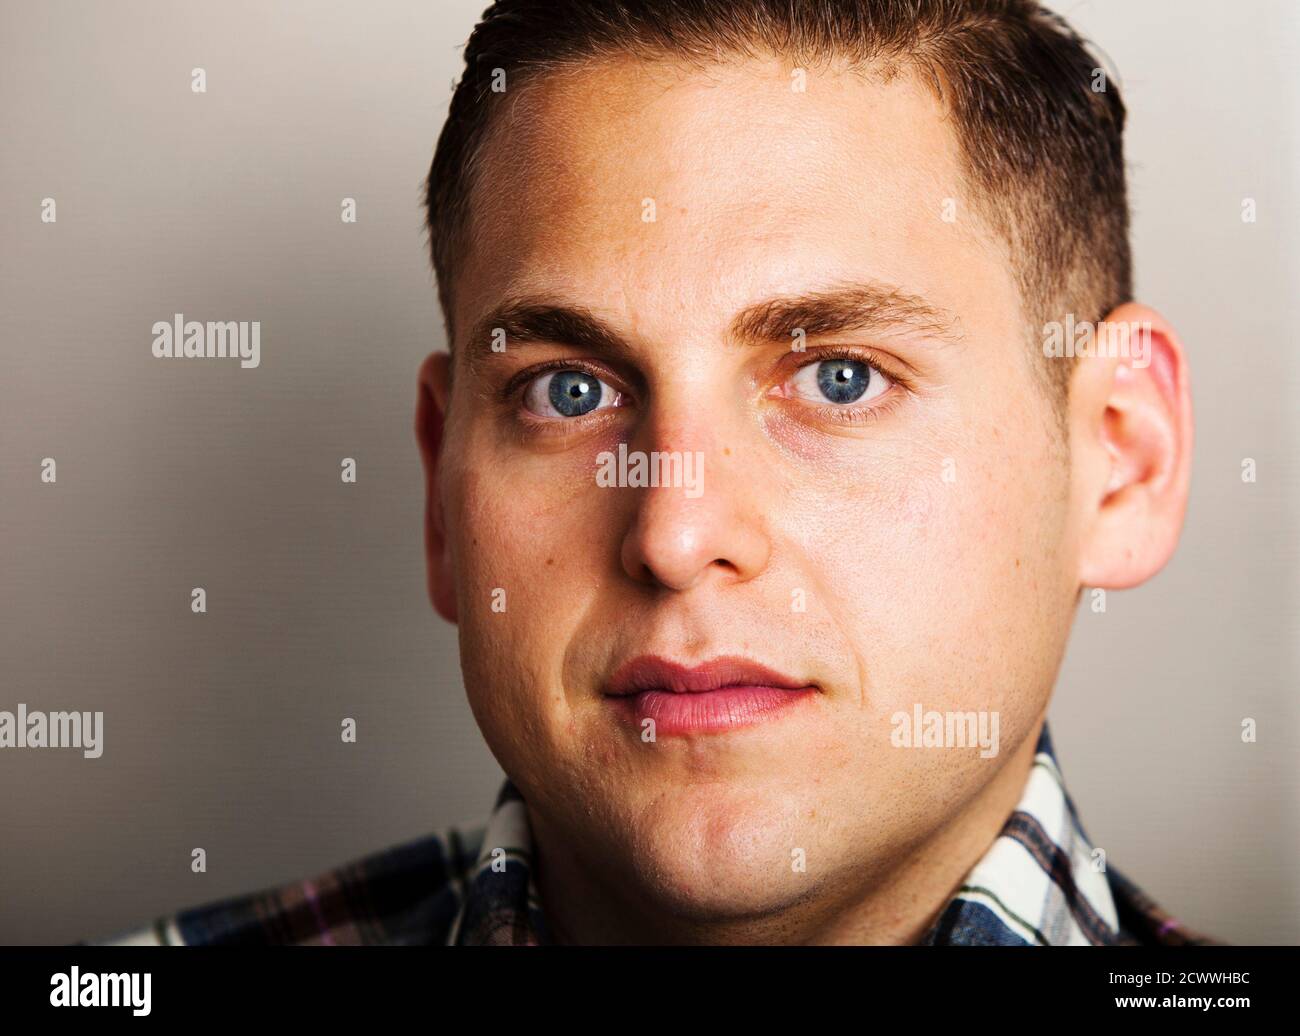 Actor Jonah Hill from the film 'Moneyball' poses during the 36th Toronto International Film Festival (TIFF) September 9, 2011. The TIFF runs from September 8-18.      REUTERS/Mark Blinch (CANADA - Tags: ENTERTAINMENT) Stock Photo